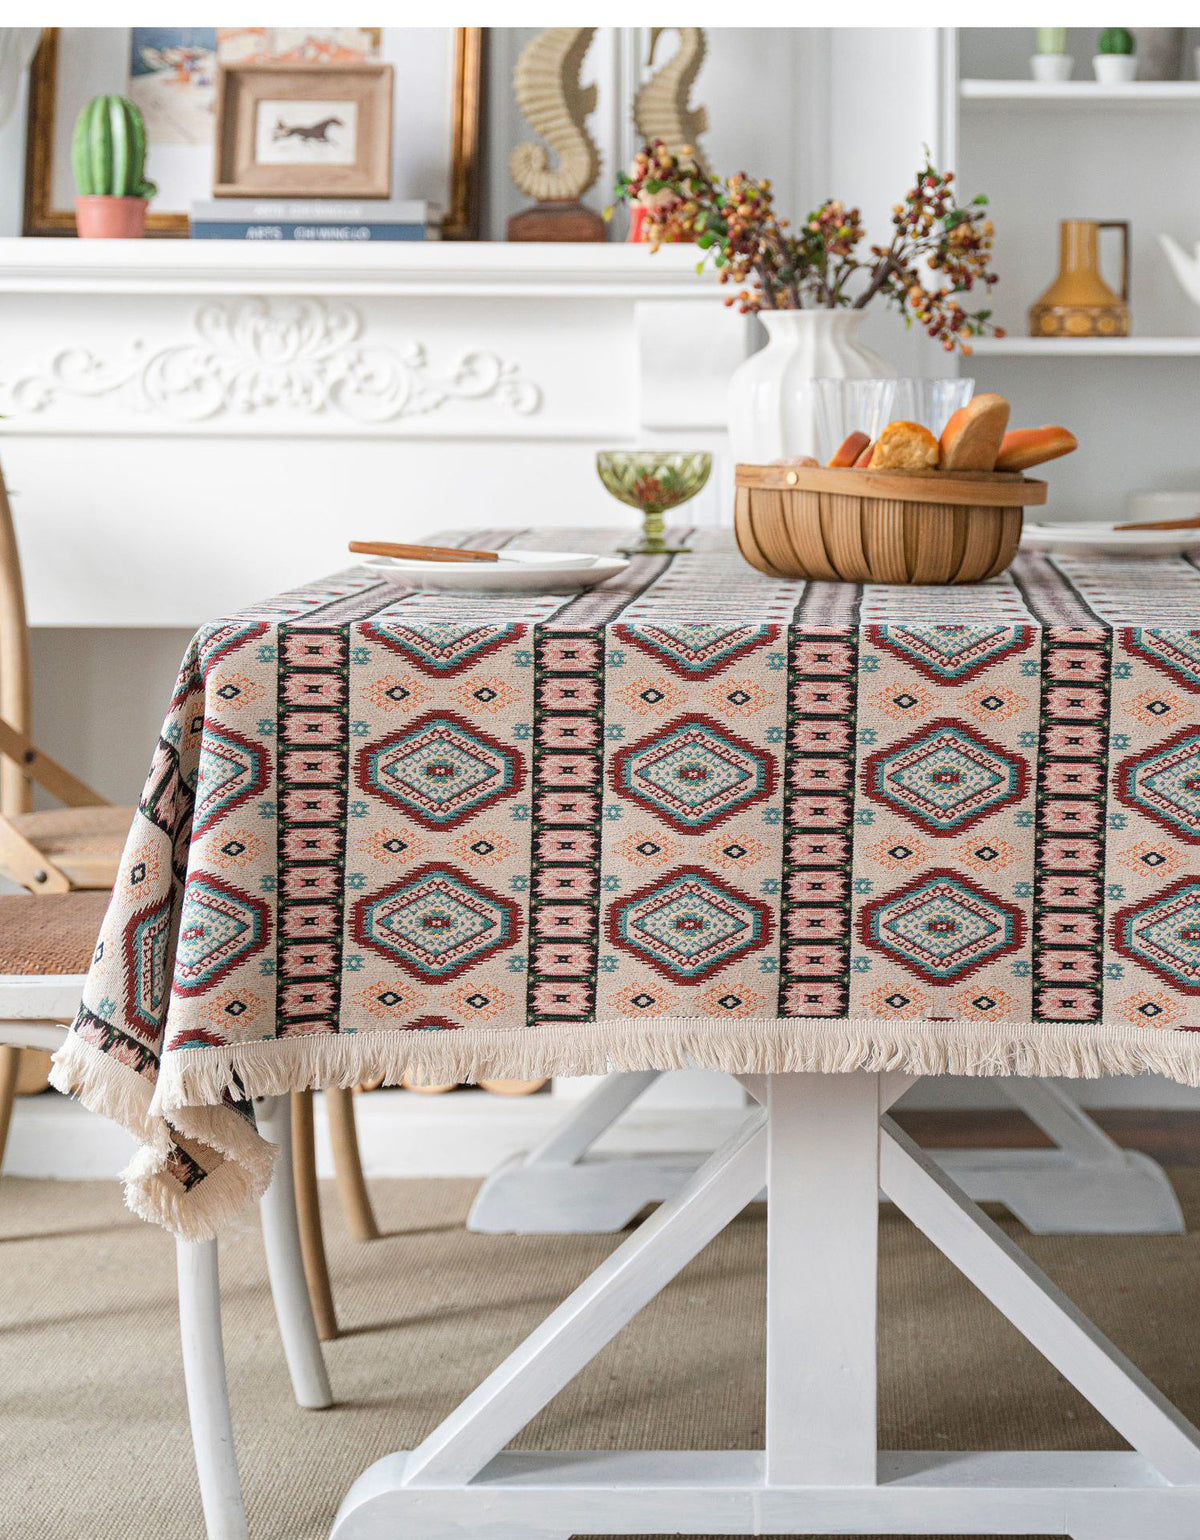 Floral Countryside Vintage Tablecloth